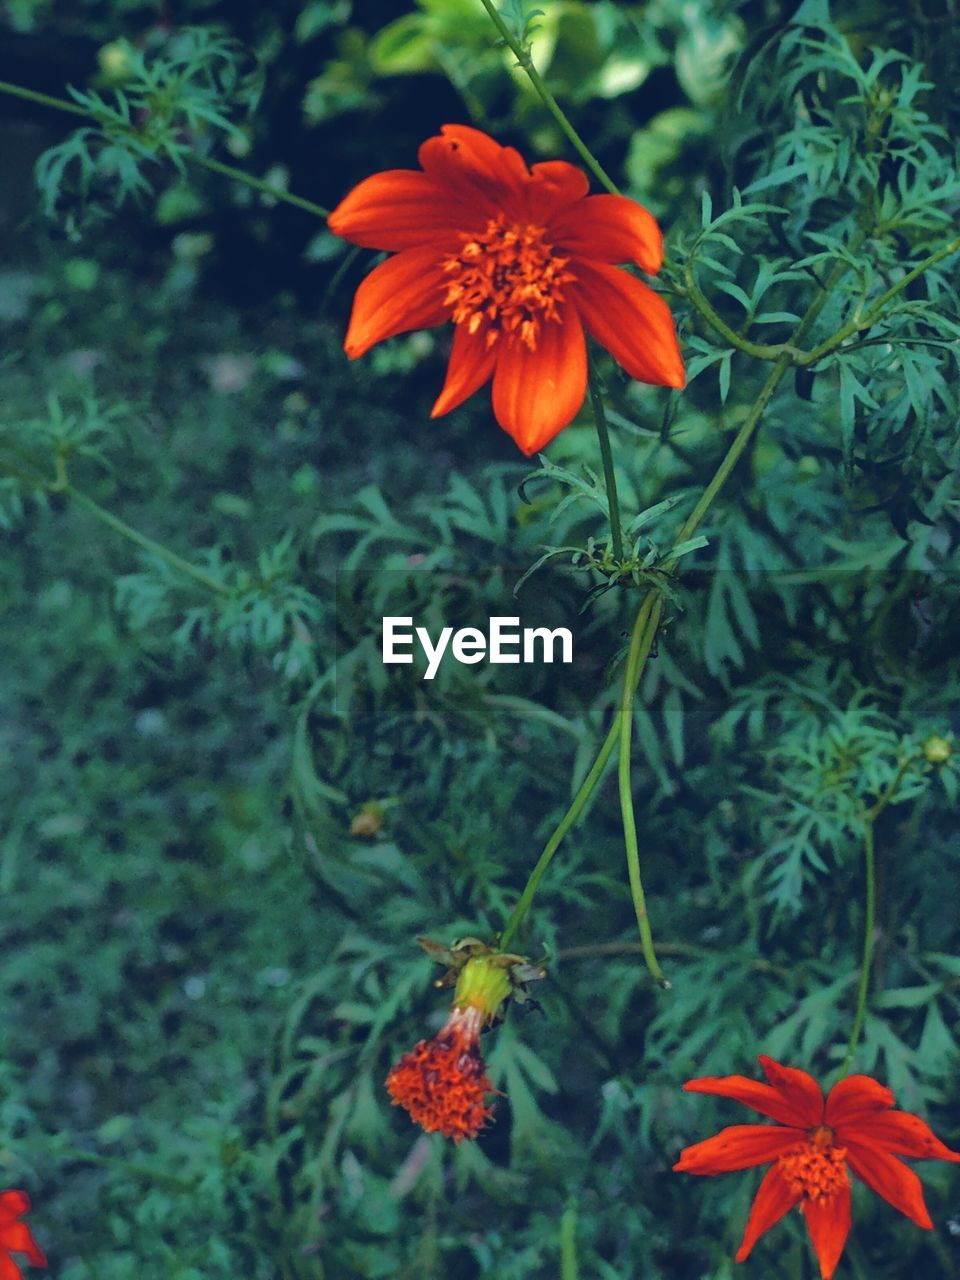 plant, flower, flowering plant, beauty in nature, freshness, growth, nature, orange color, fragility, close-up, petal, flower head, no people, red, wildflower, plant part, inflorescence, green, leaf, focus on foreground, day, botany, outdoors